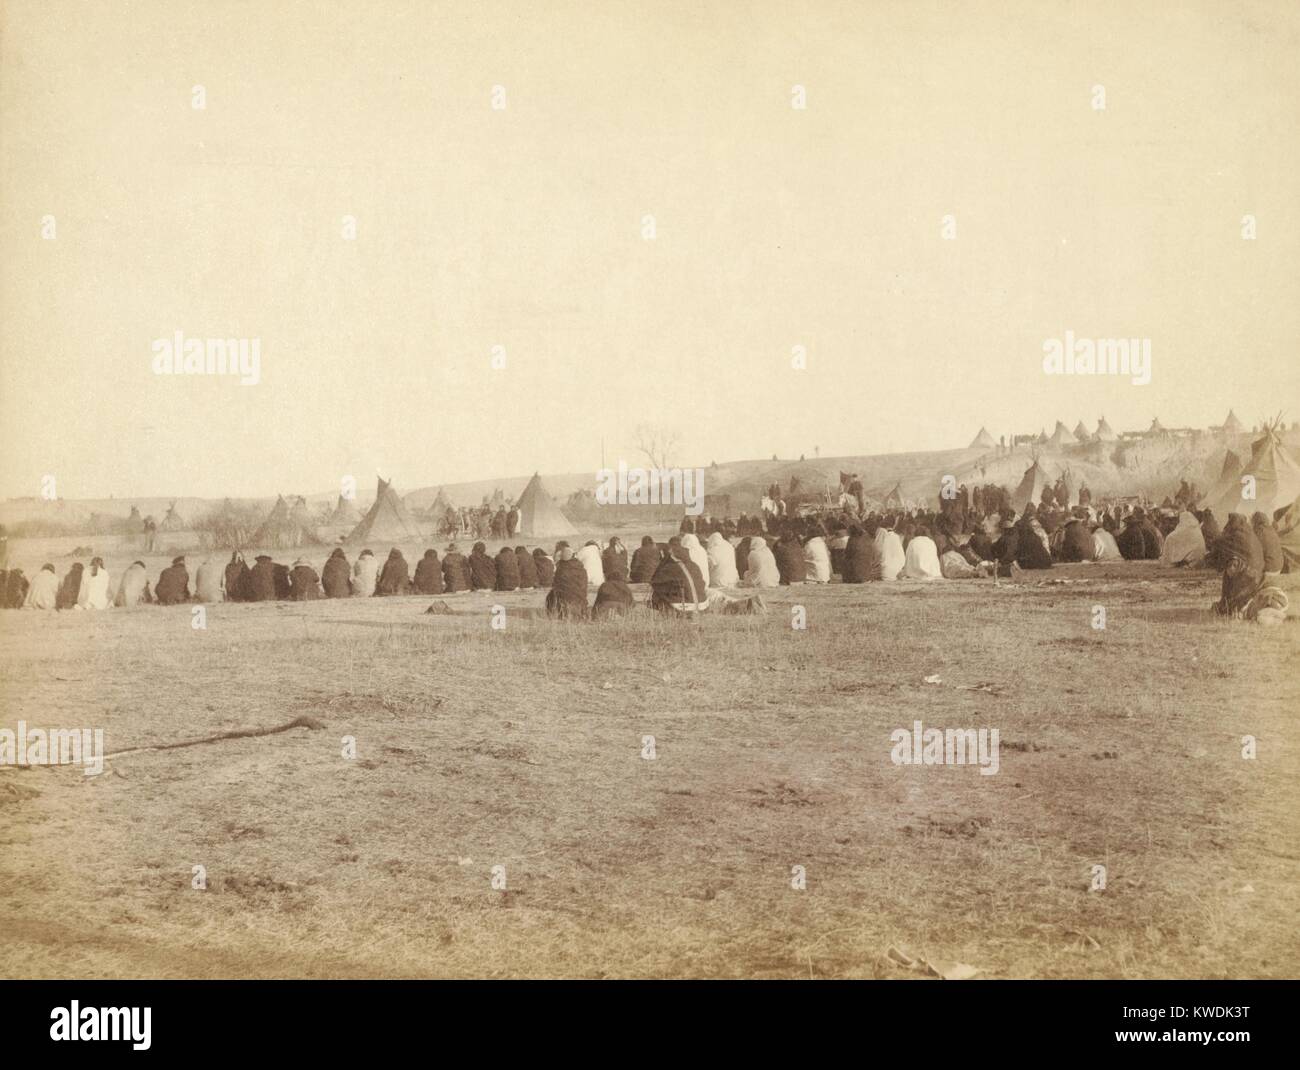 Native Americans in council after Wounded Knee Massacre of Dec. 29, 1890. Rear view of a large semi-circle of Lakota men sitting on the ground, with tipis in background, on Pine Ridge Reservation during re-establishment of peace in Jan. 1891. Photo by John Grabill, Jan. 1891 (BSLOC 2017 18 28) Stock Photo